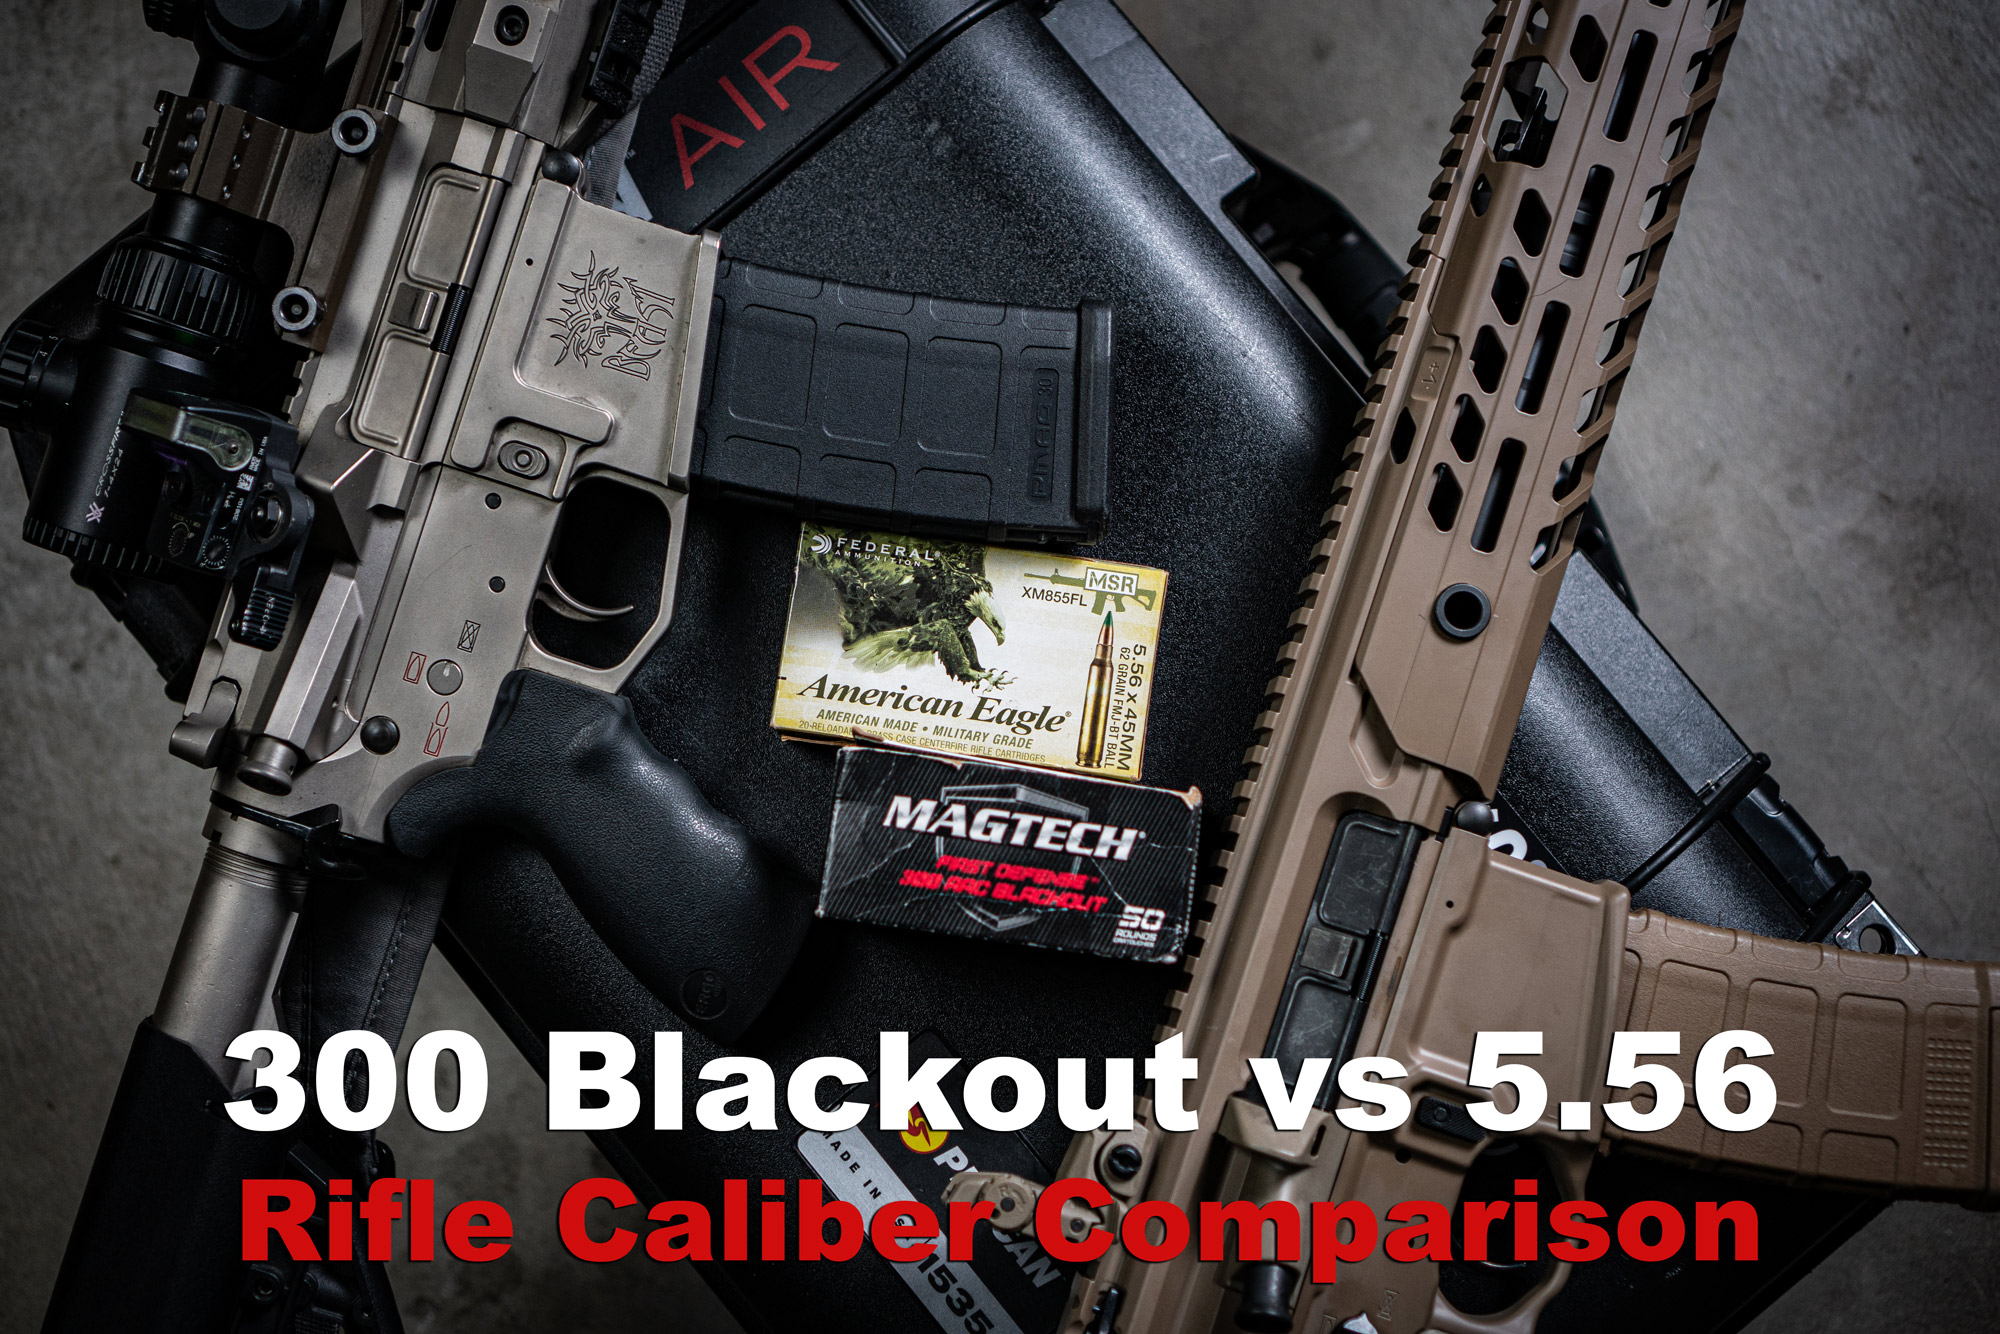 300 blackout vs 5.56 rifles and ammo